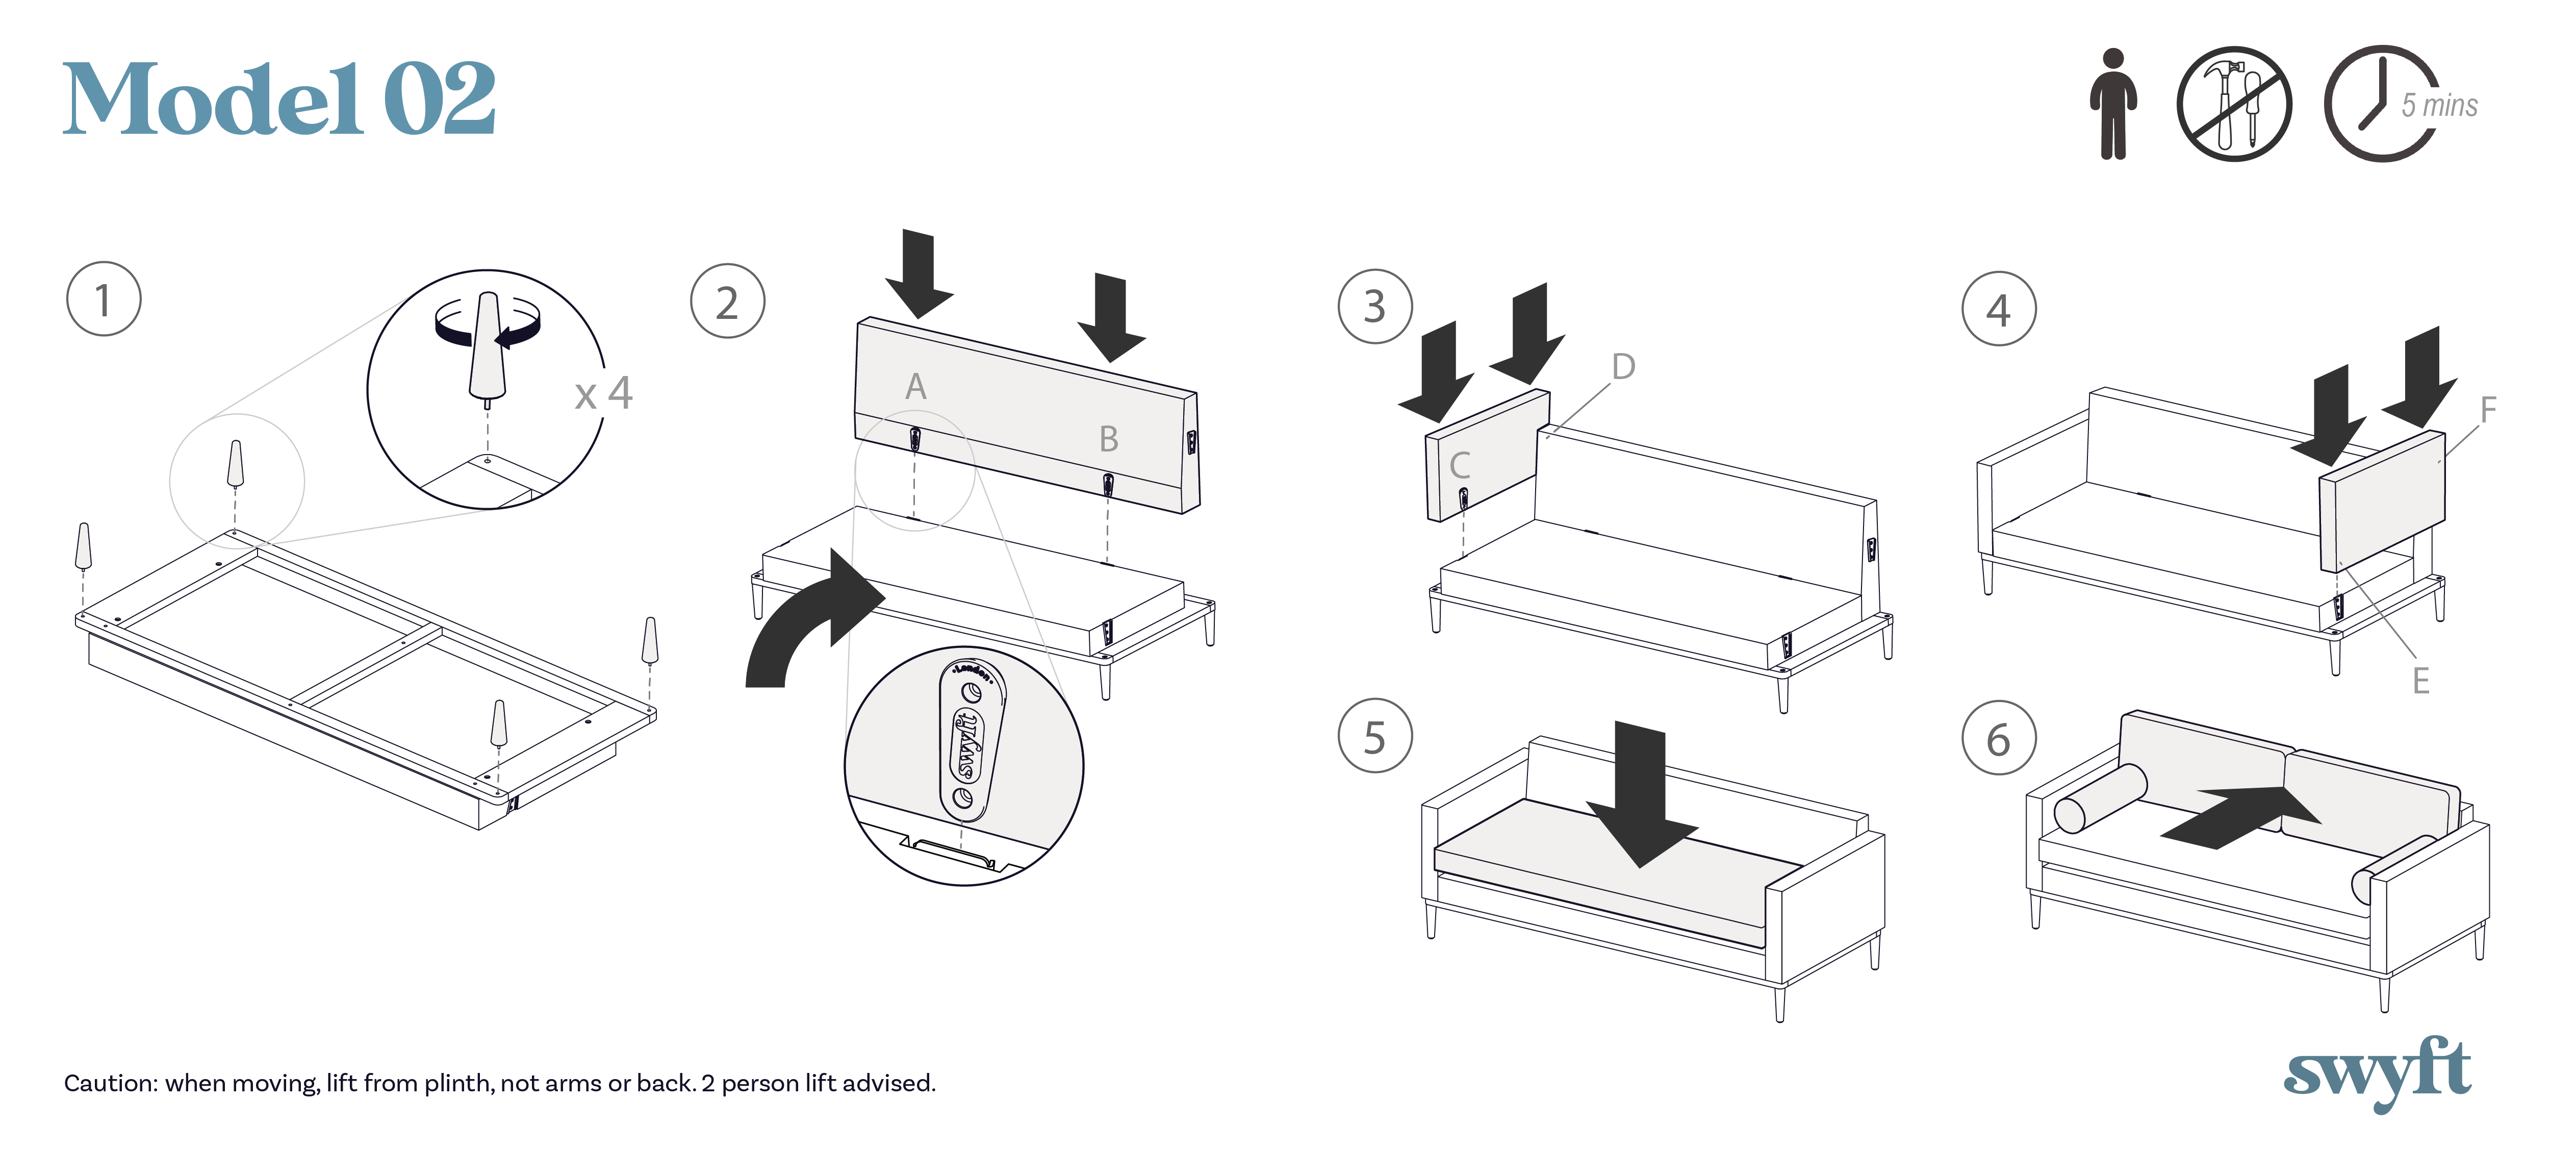 Model 02 sofa assembly instruction drawings